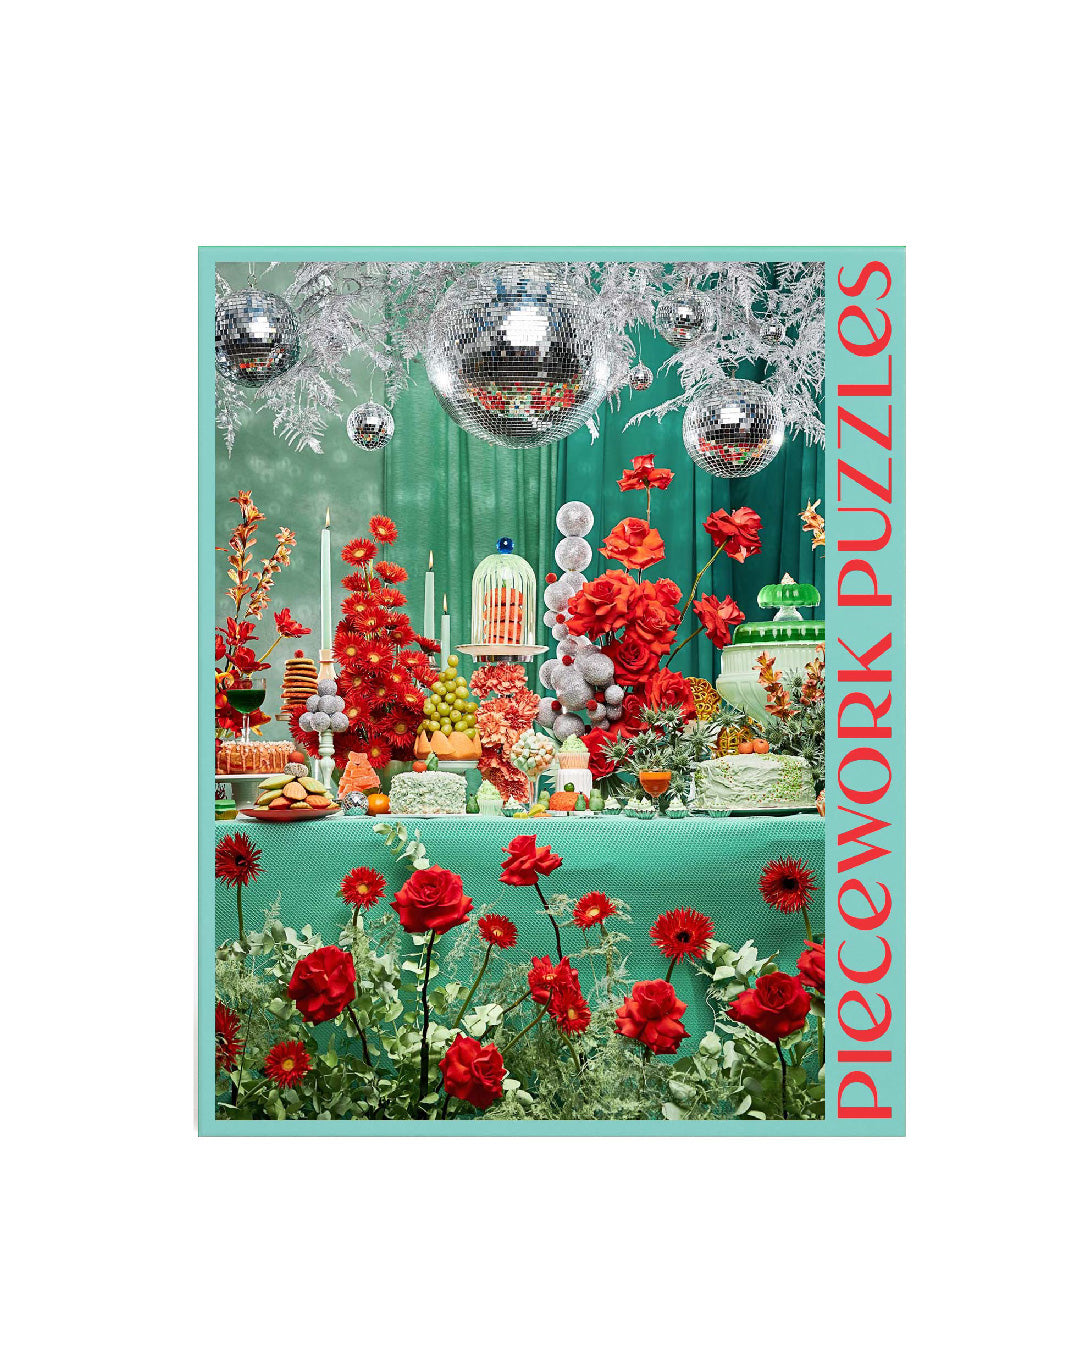 Flower Feast 1000 Piece Puzzle | Undisclosed